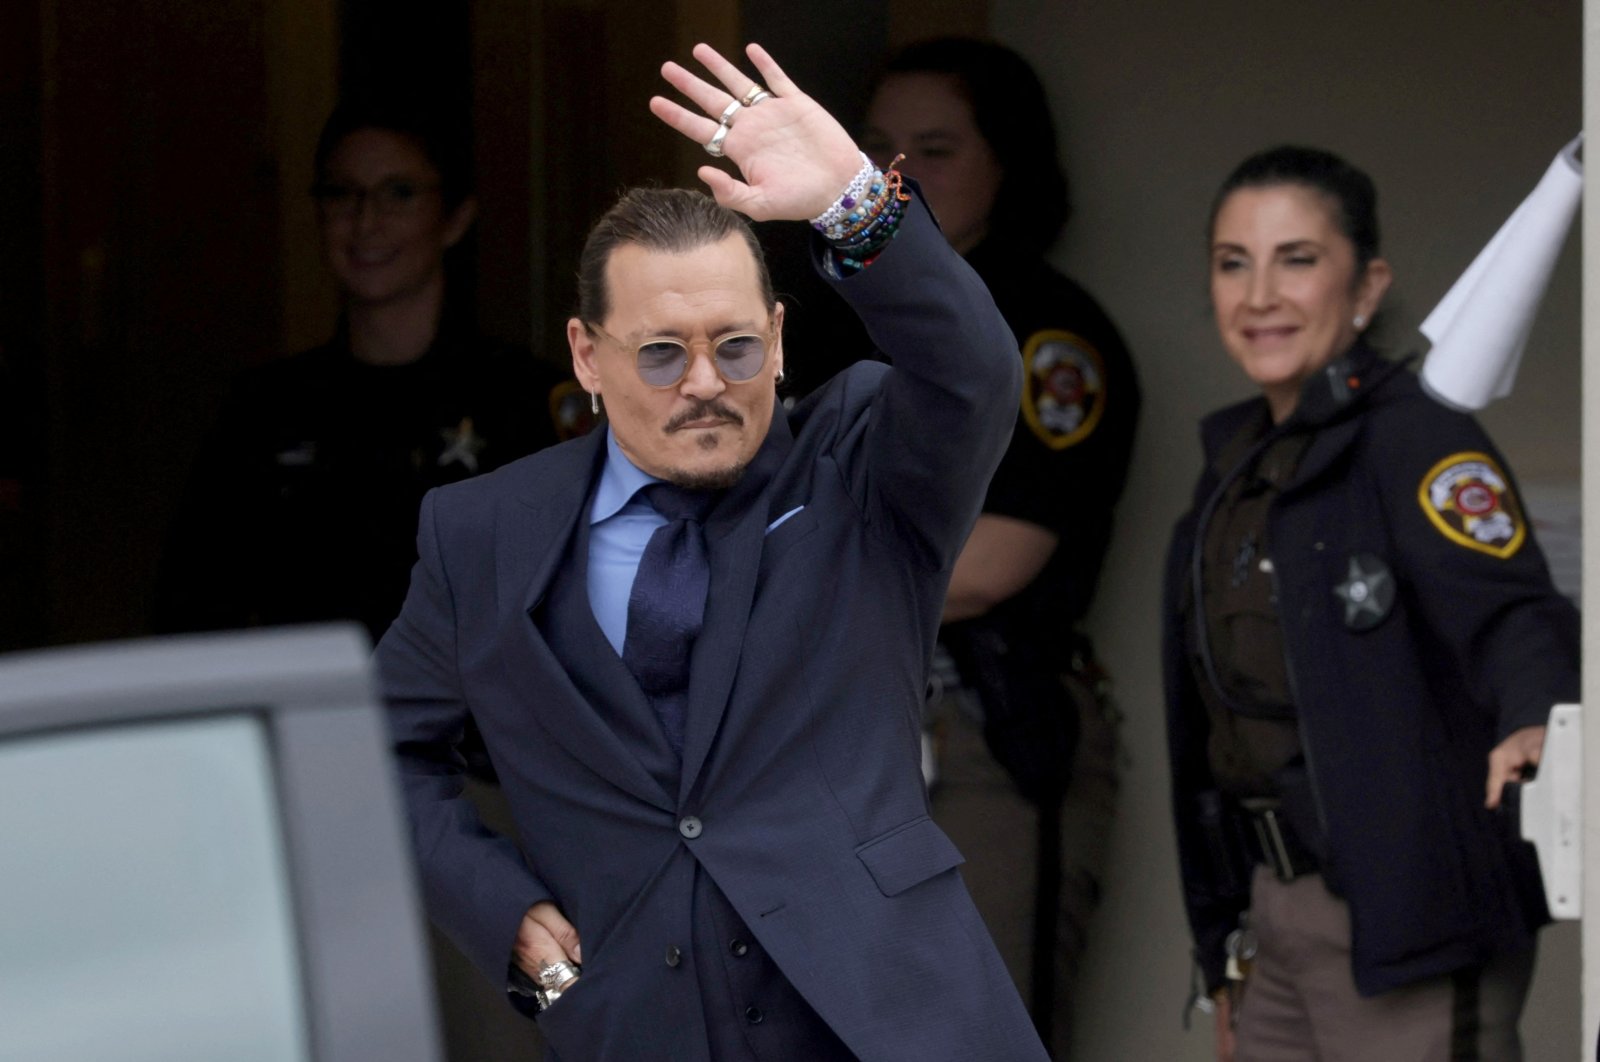 Actor Johnny Depp gestures as he leaves the Fairfax County Circuit Courthouse following his defamation trial against his ex-wife Amber Heard, in Fairfax, Virginia, U.S., May 27, 2022. (Reuters Photo)